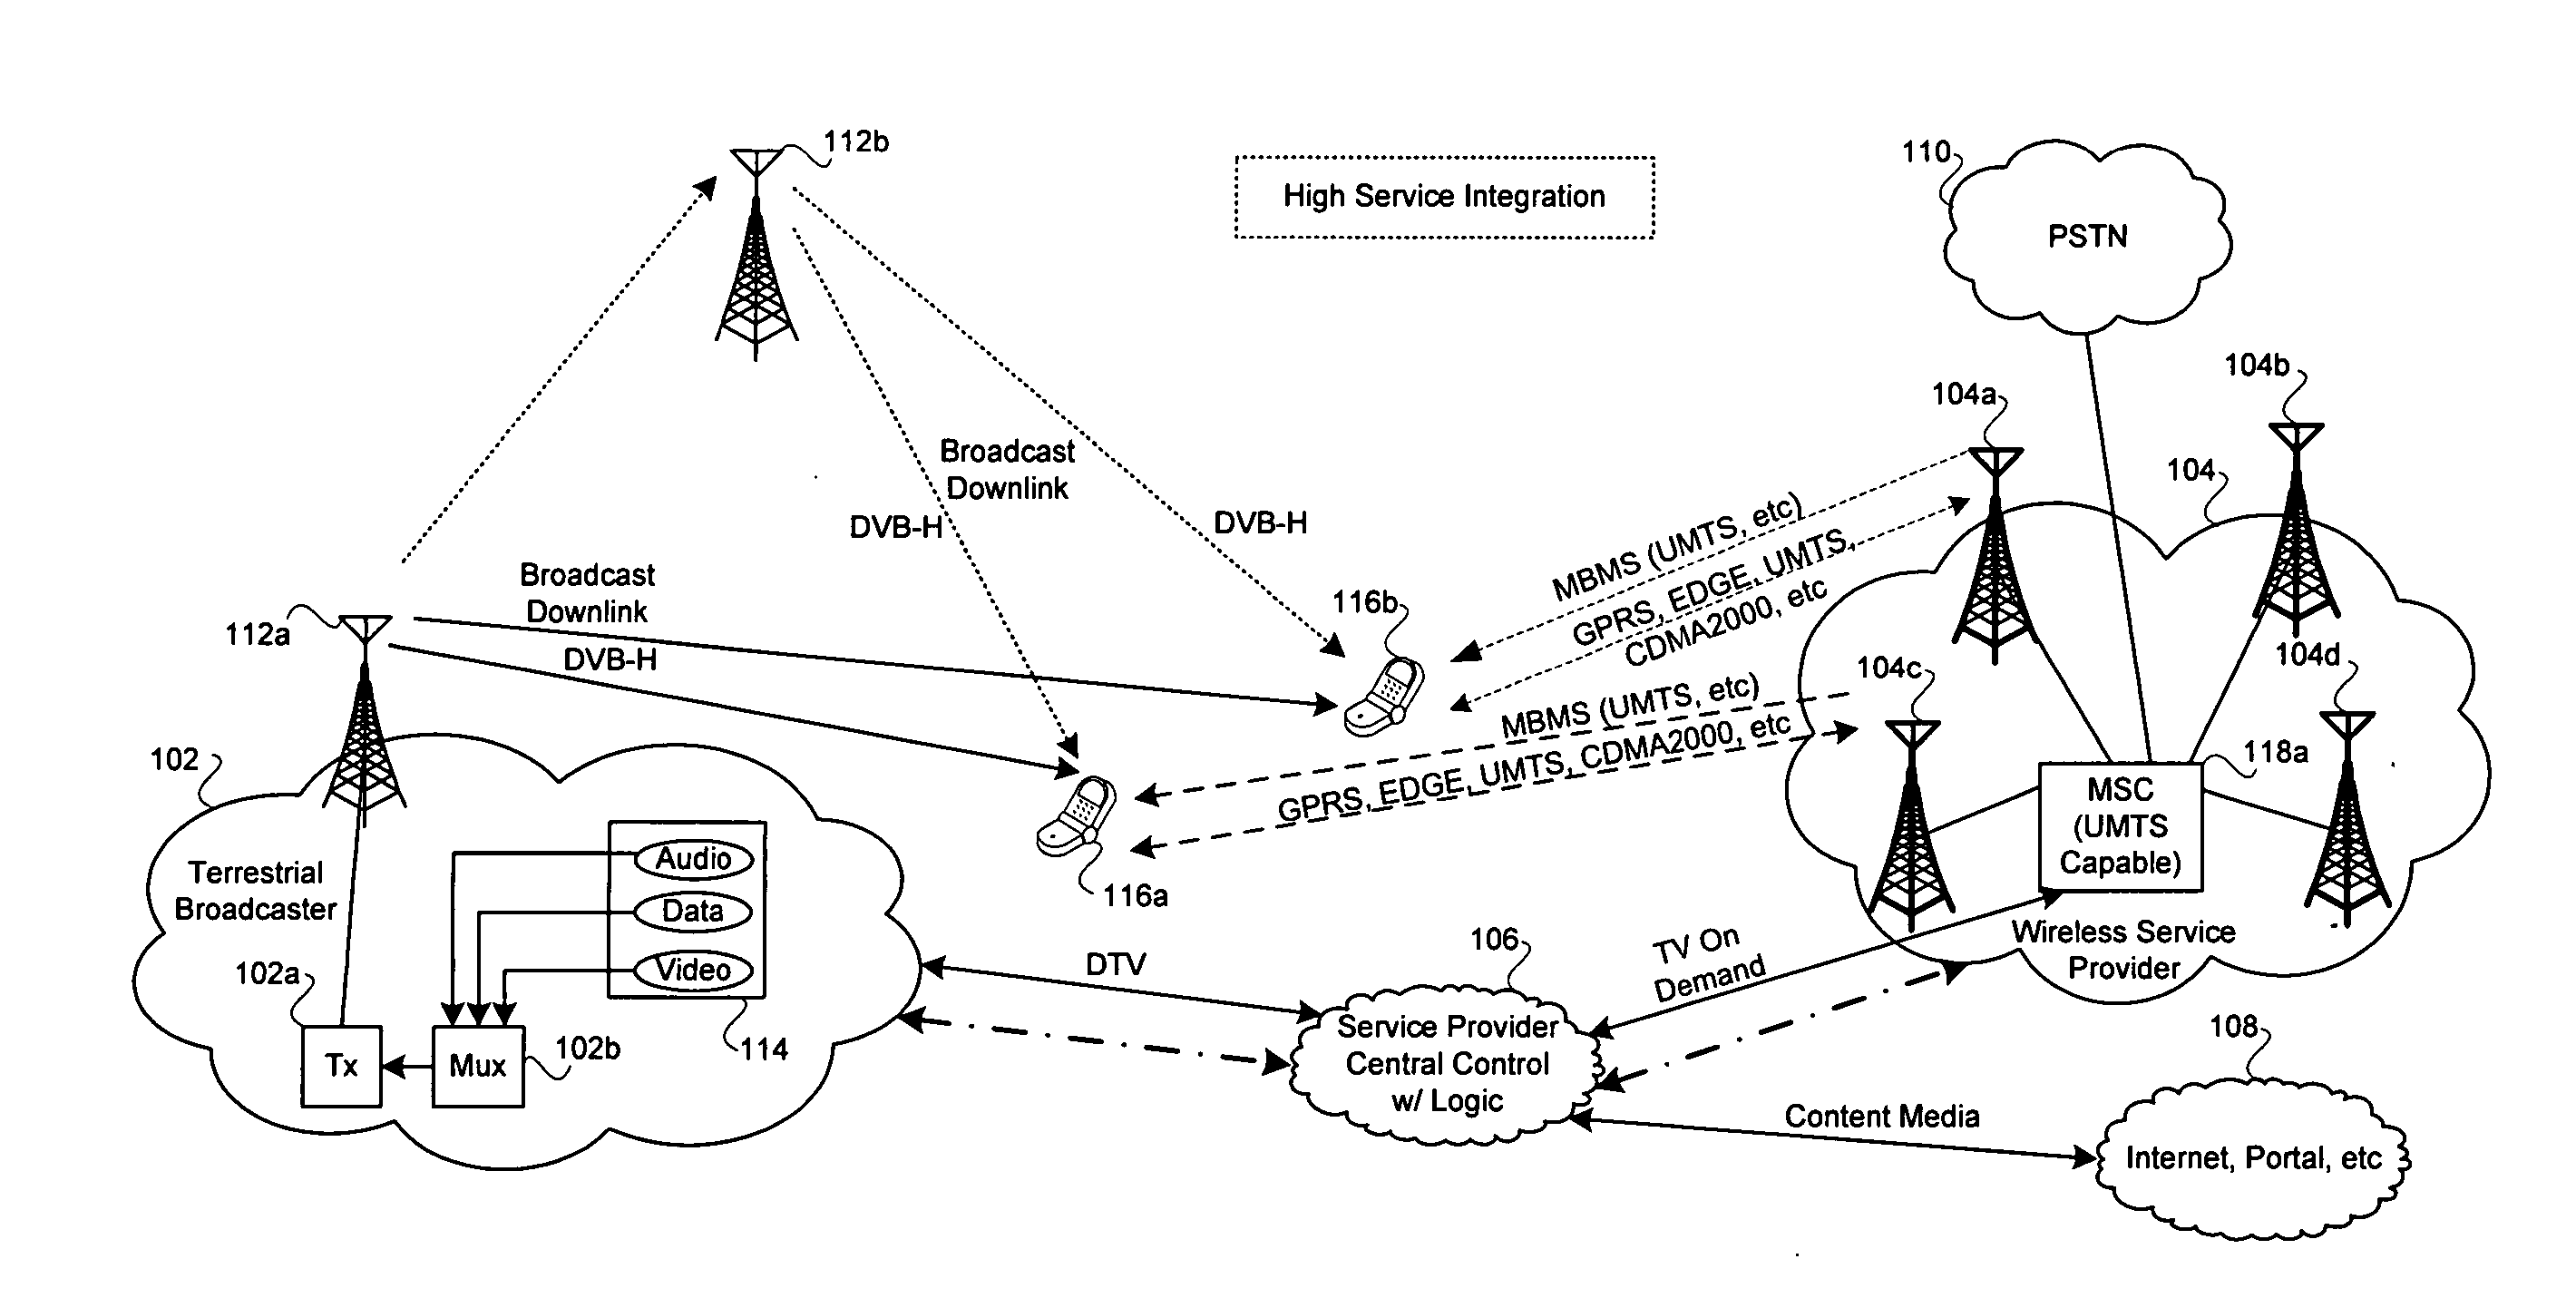 Method and system for mobile receiver antenna architecture for world band cellular and broadcasting services